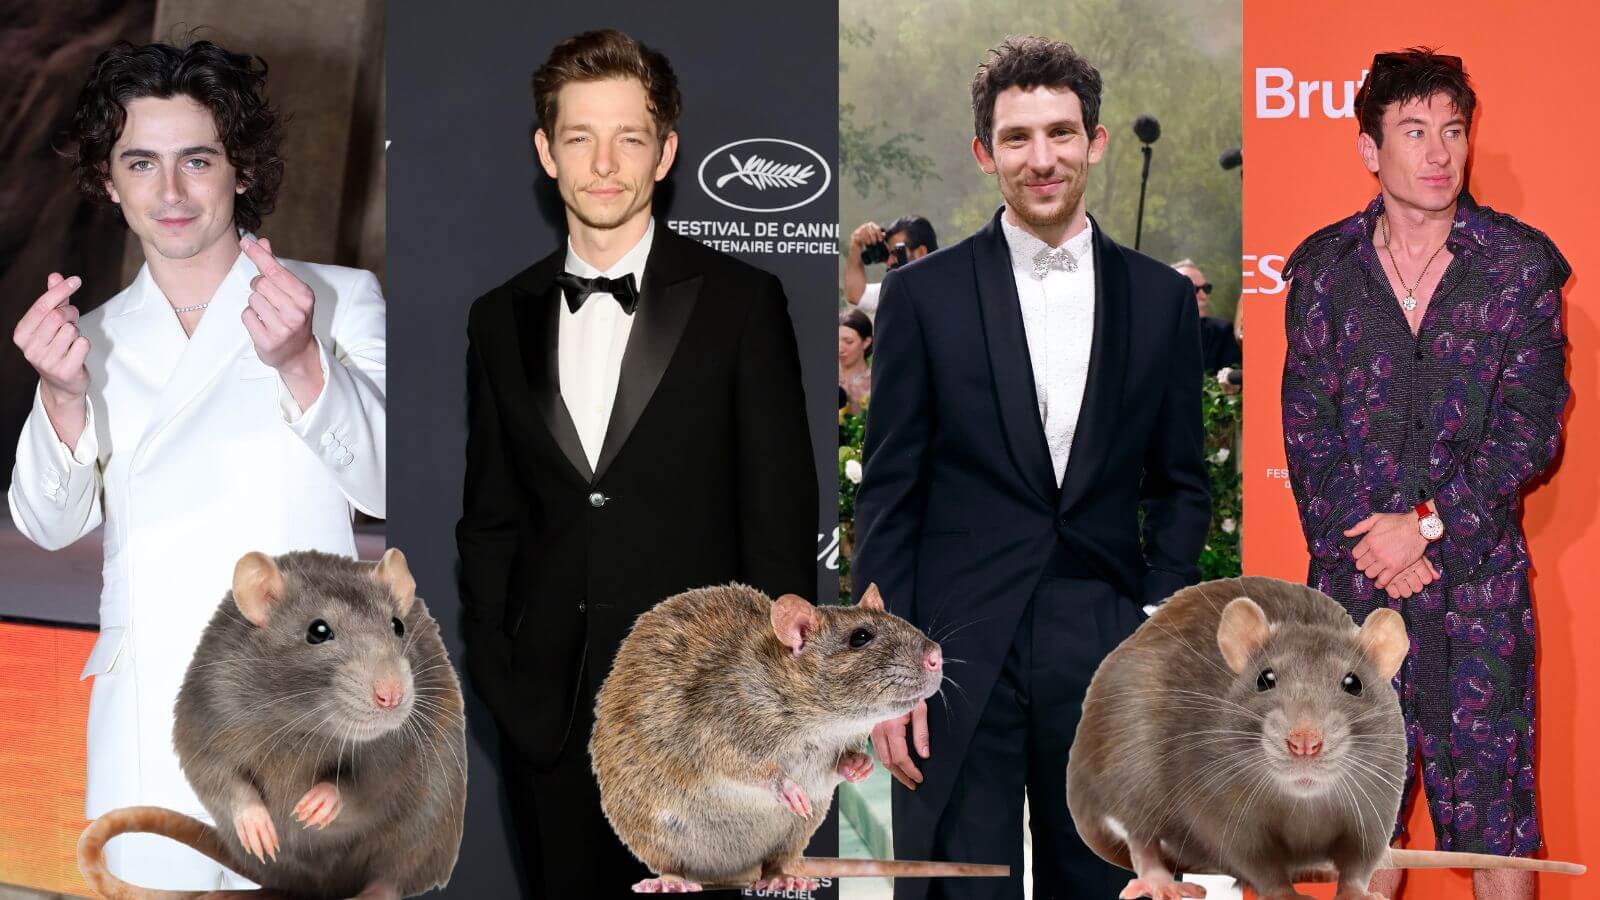 Some of the hot rodent men, with a few rodents for comparison.